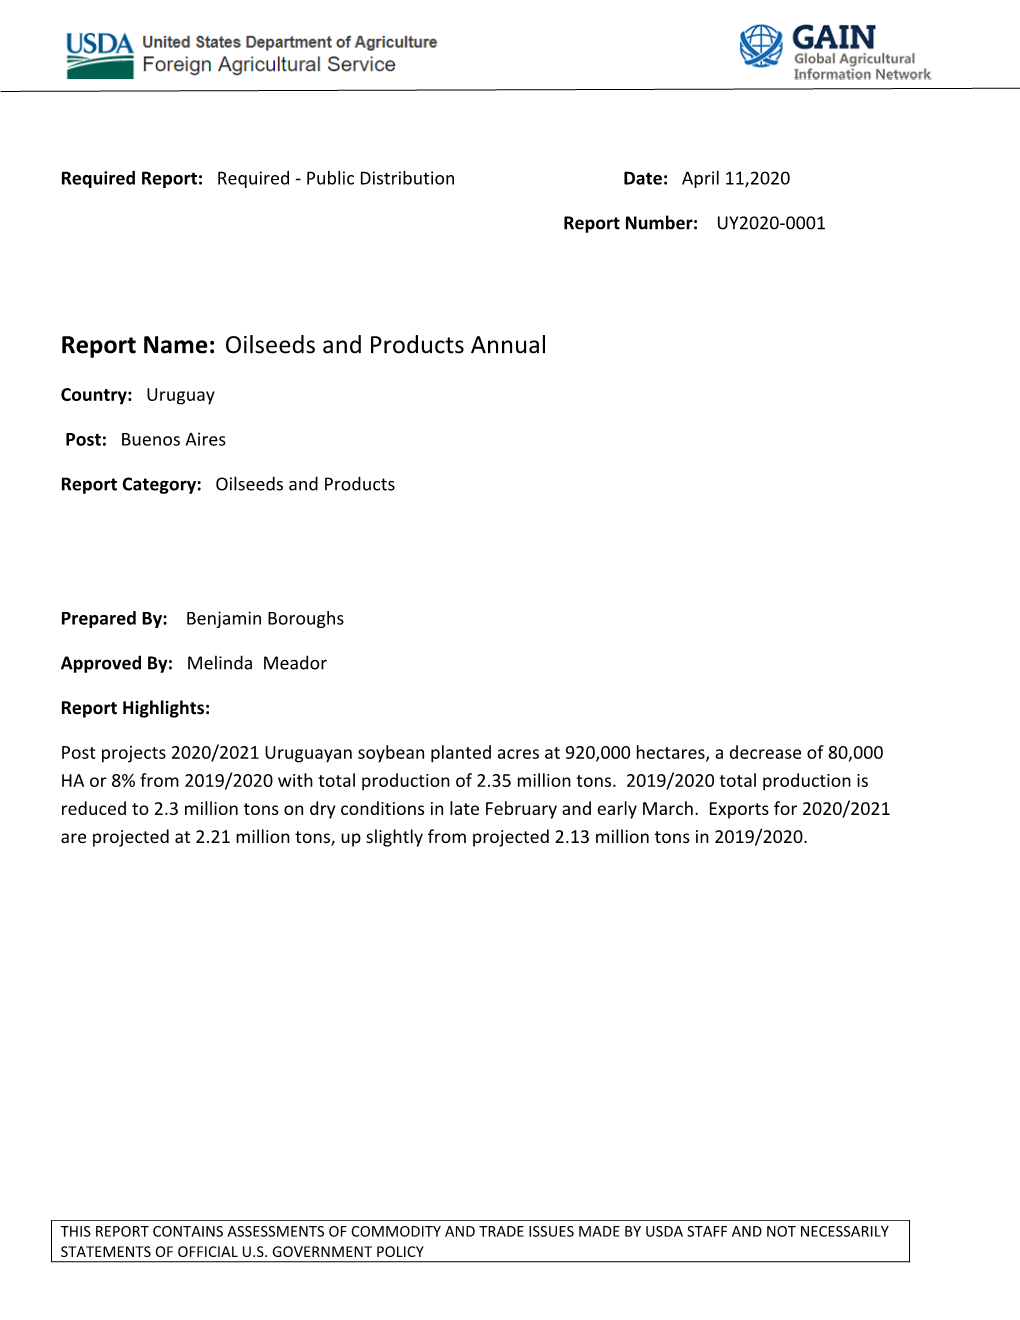 Report Name: Oilseeds and Products Annual